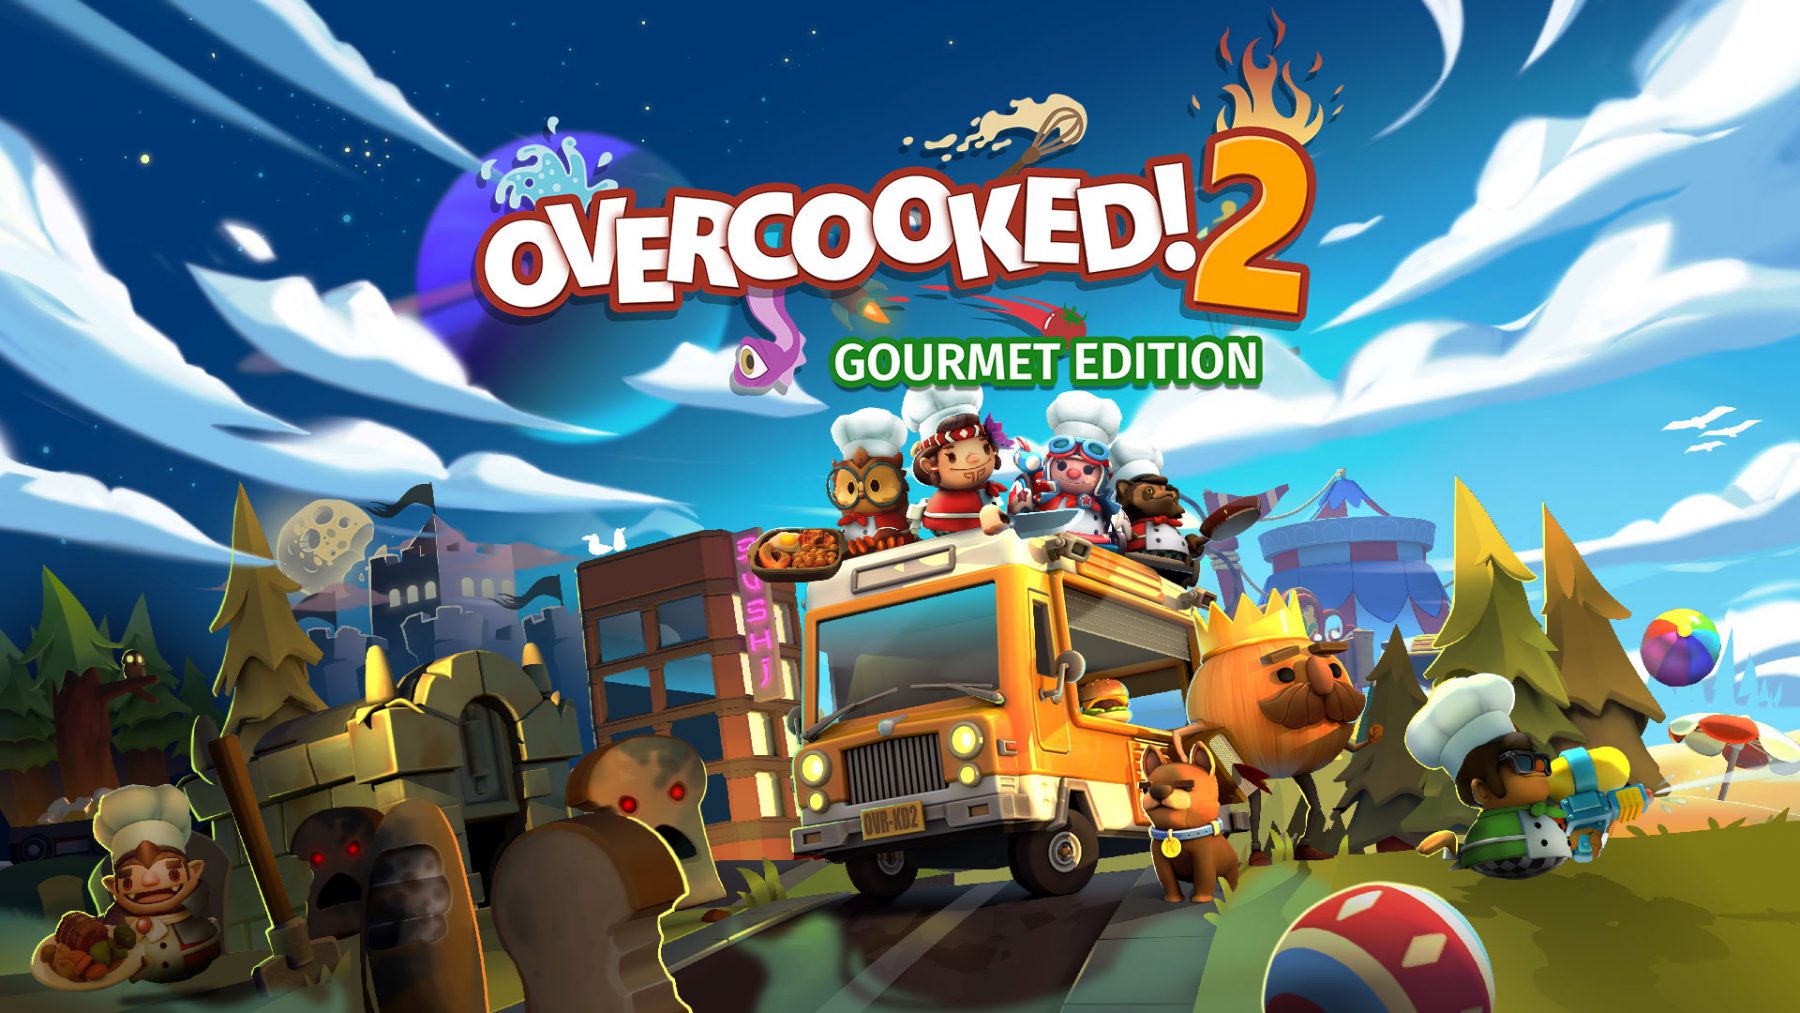 Overcooked! 2 - Gourmet Edition